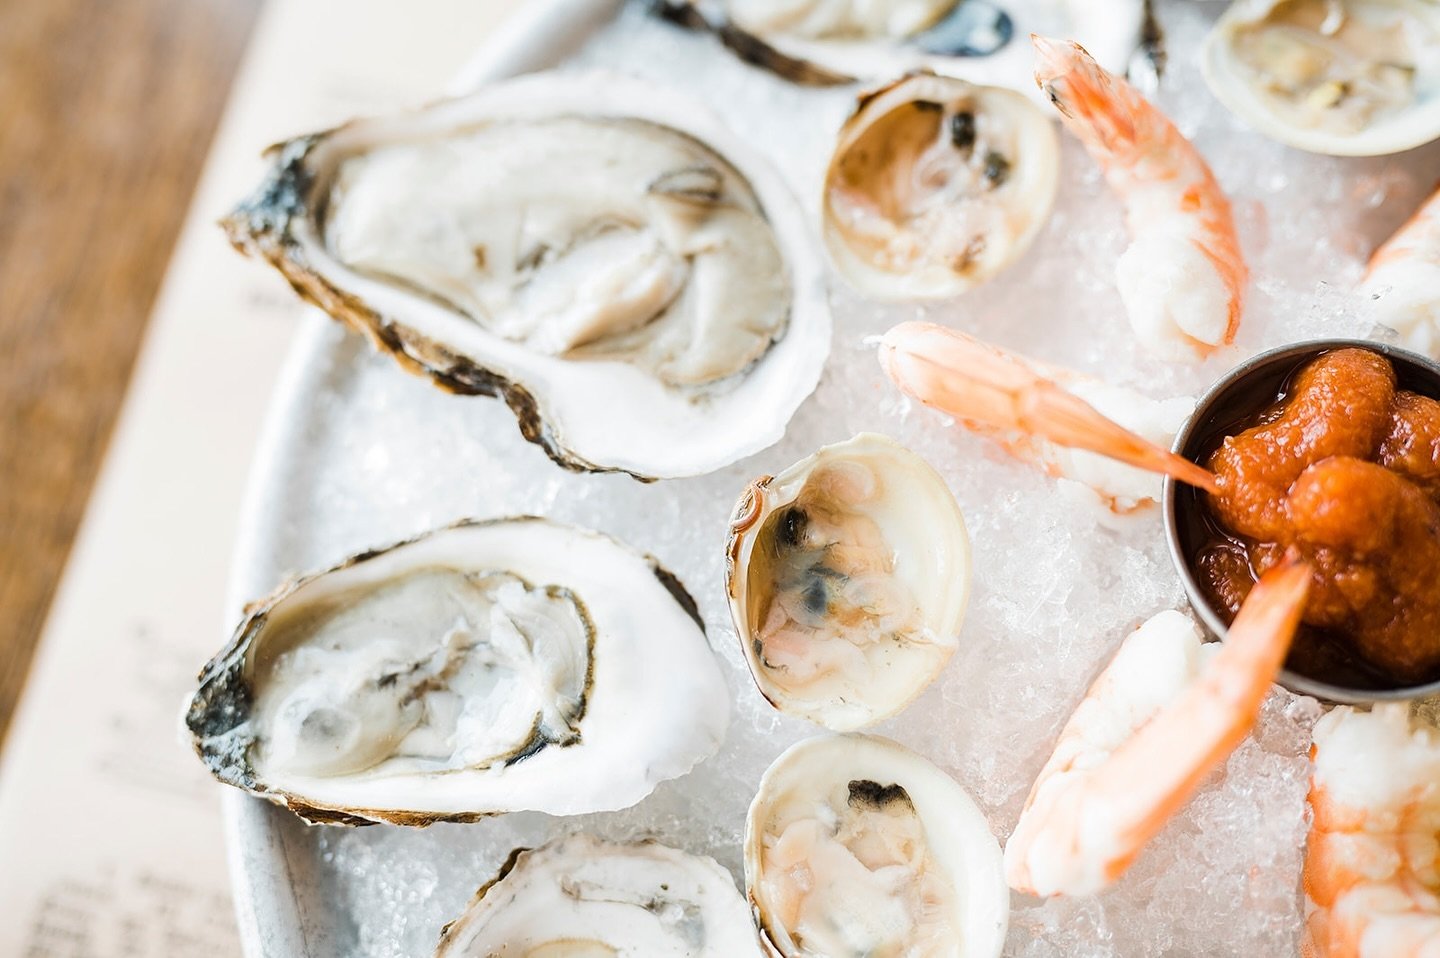 Raw Bar Happy Hour! 

Enjoy Drink Specials + $1 Blue Point Oysters &amp; Shrimp Cocktail! 🦪🍤

At the Bar from 5:00-6:00

#oldfieldsofgreenlawn